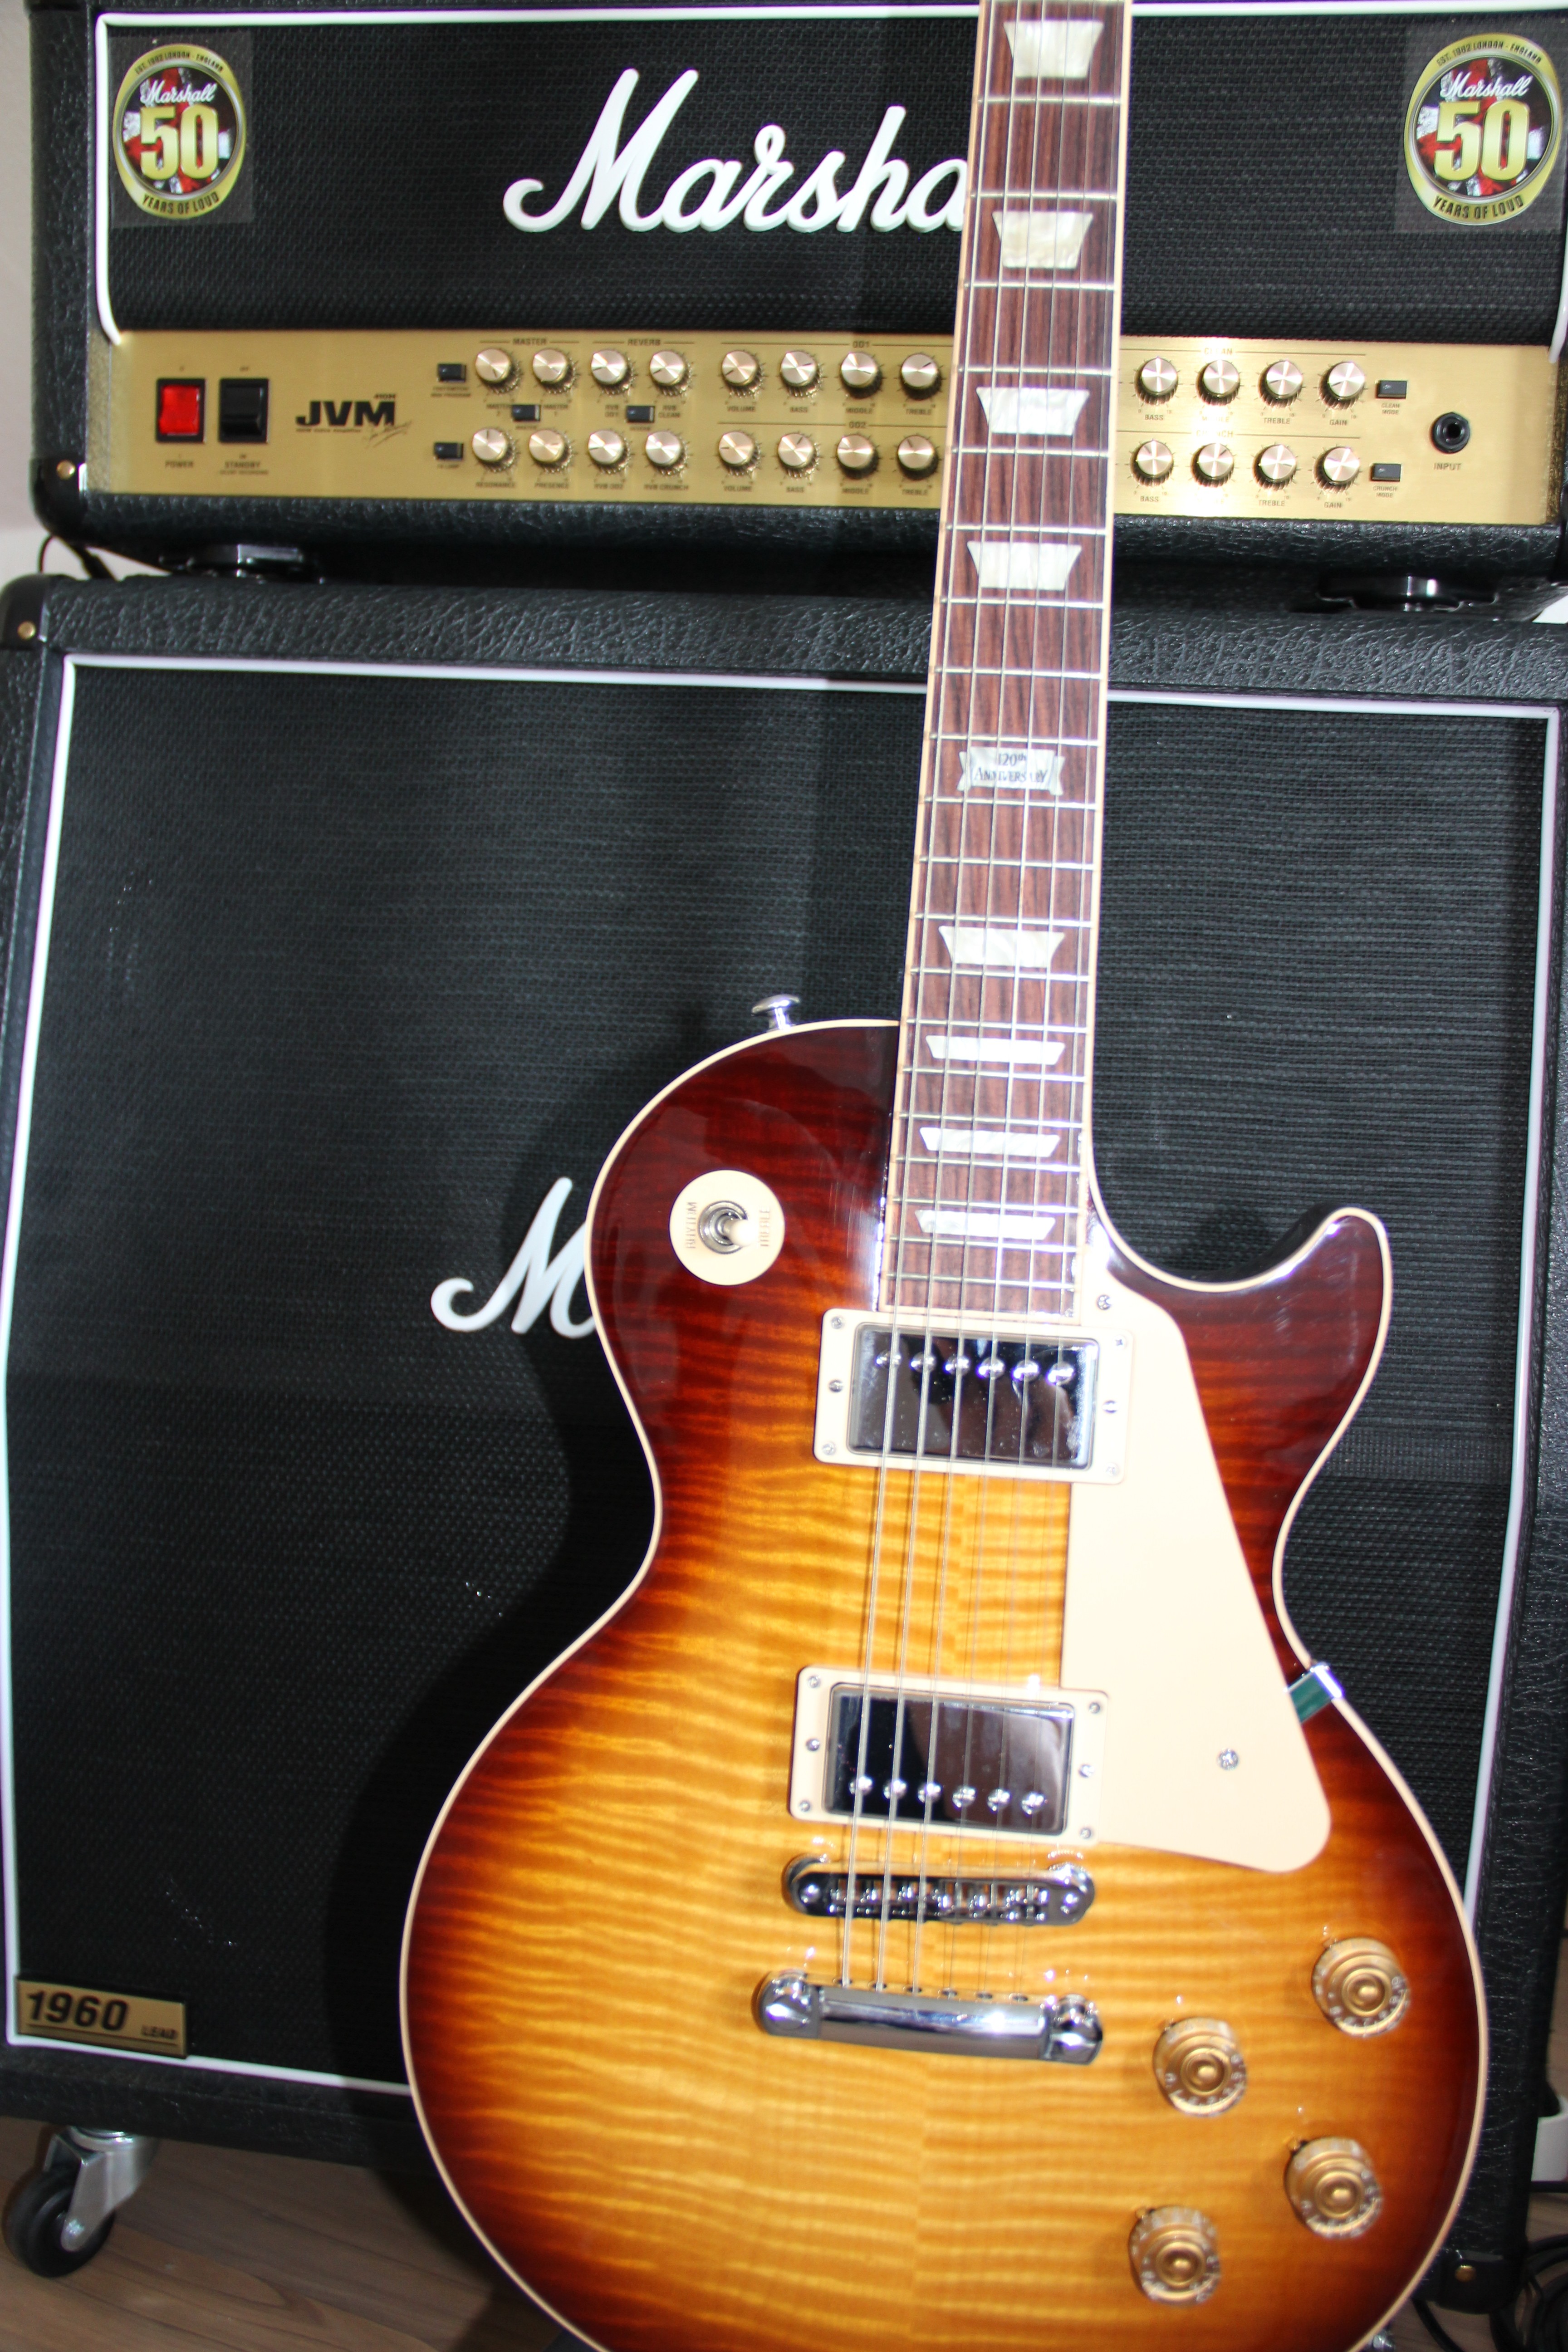 Gibson Les Paul Traditional 2014 TS 021